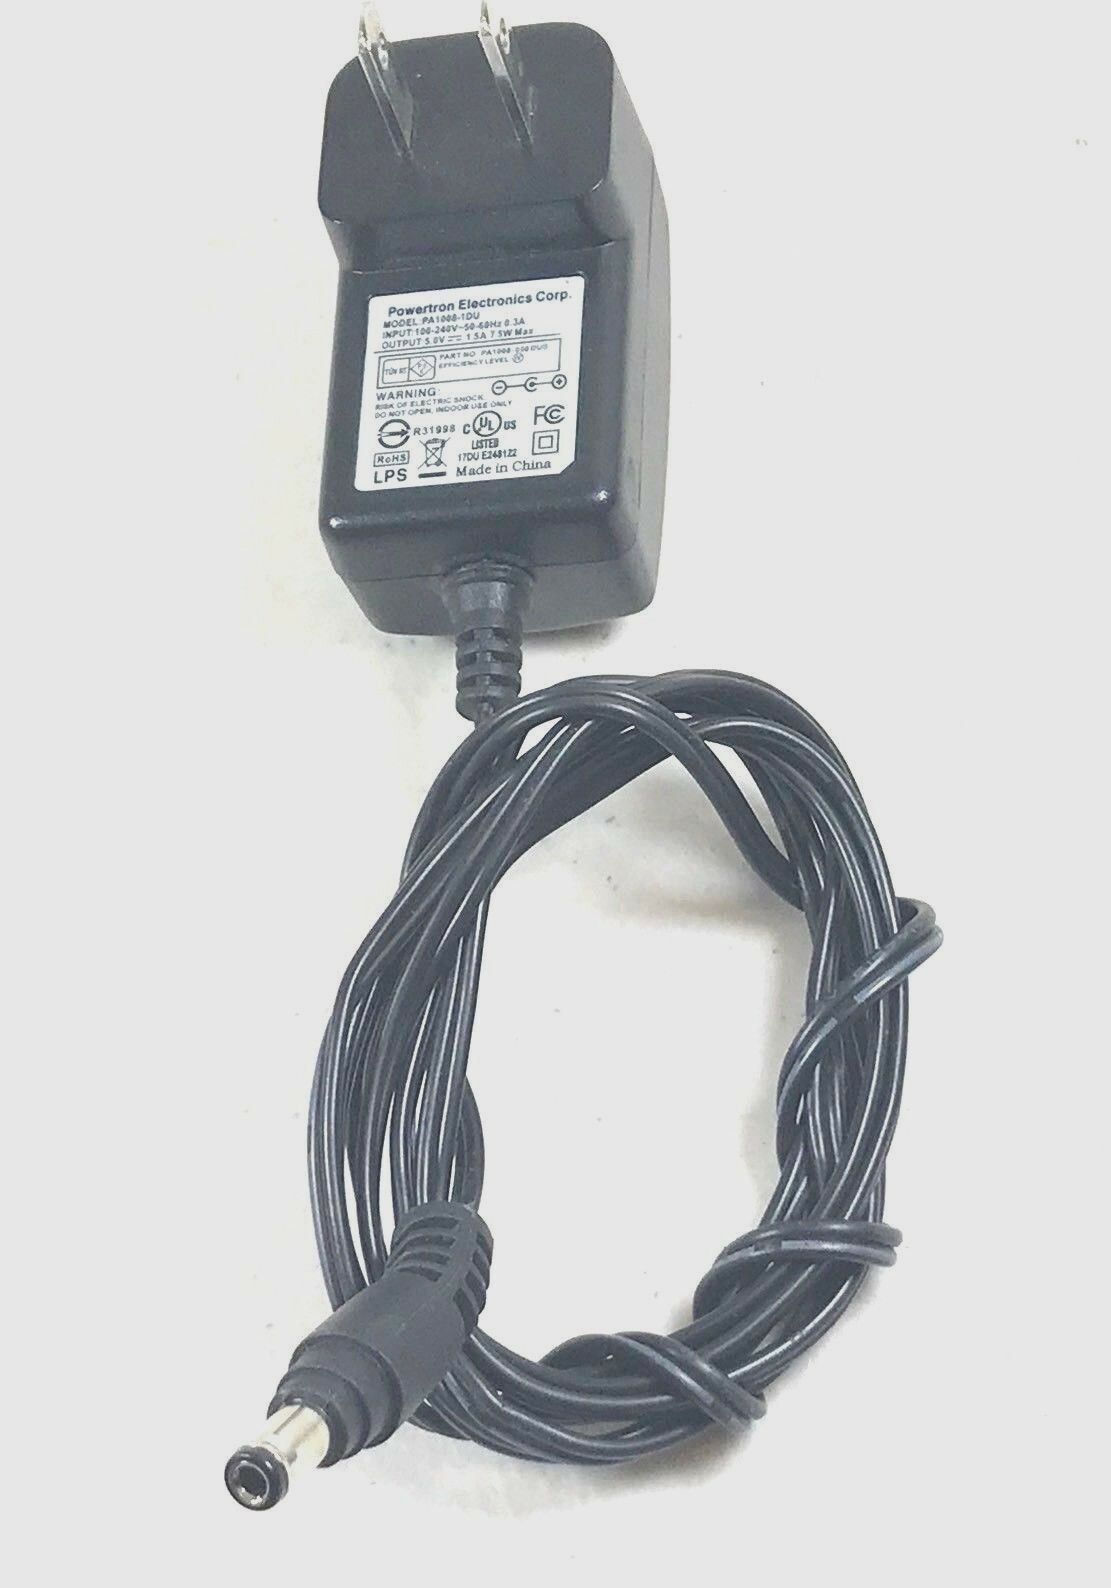 NEW 5.0V DC 1.0A AC Adapter For Powertron Electronics PA1008-1DU Power Supply